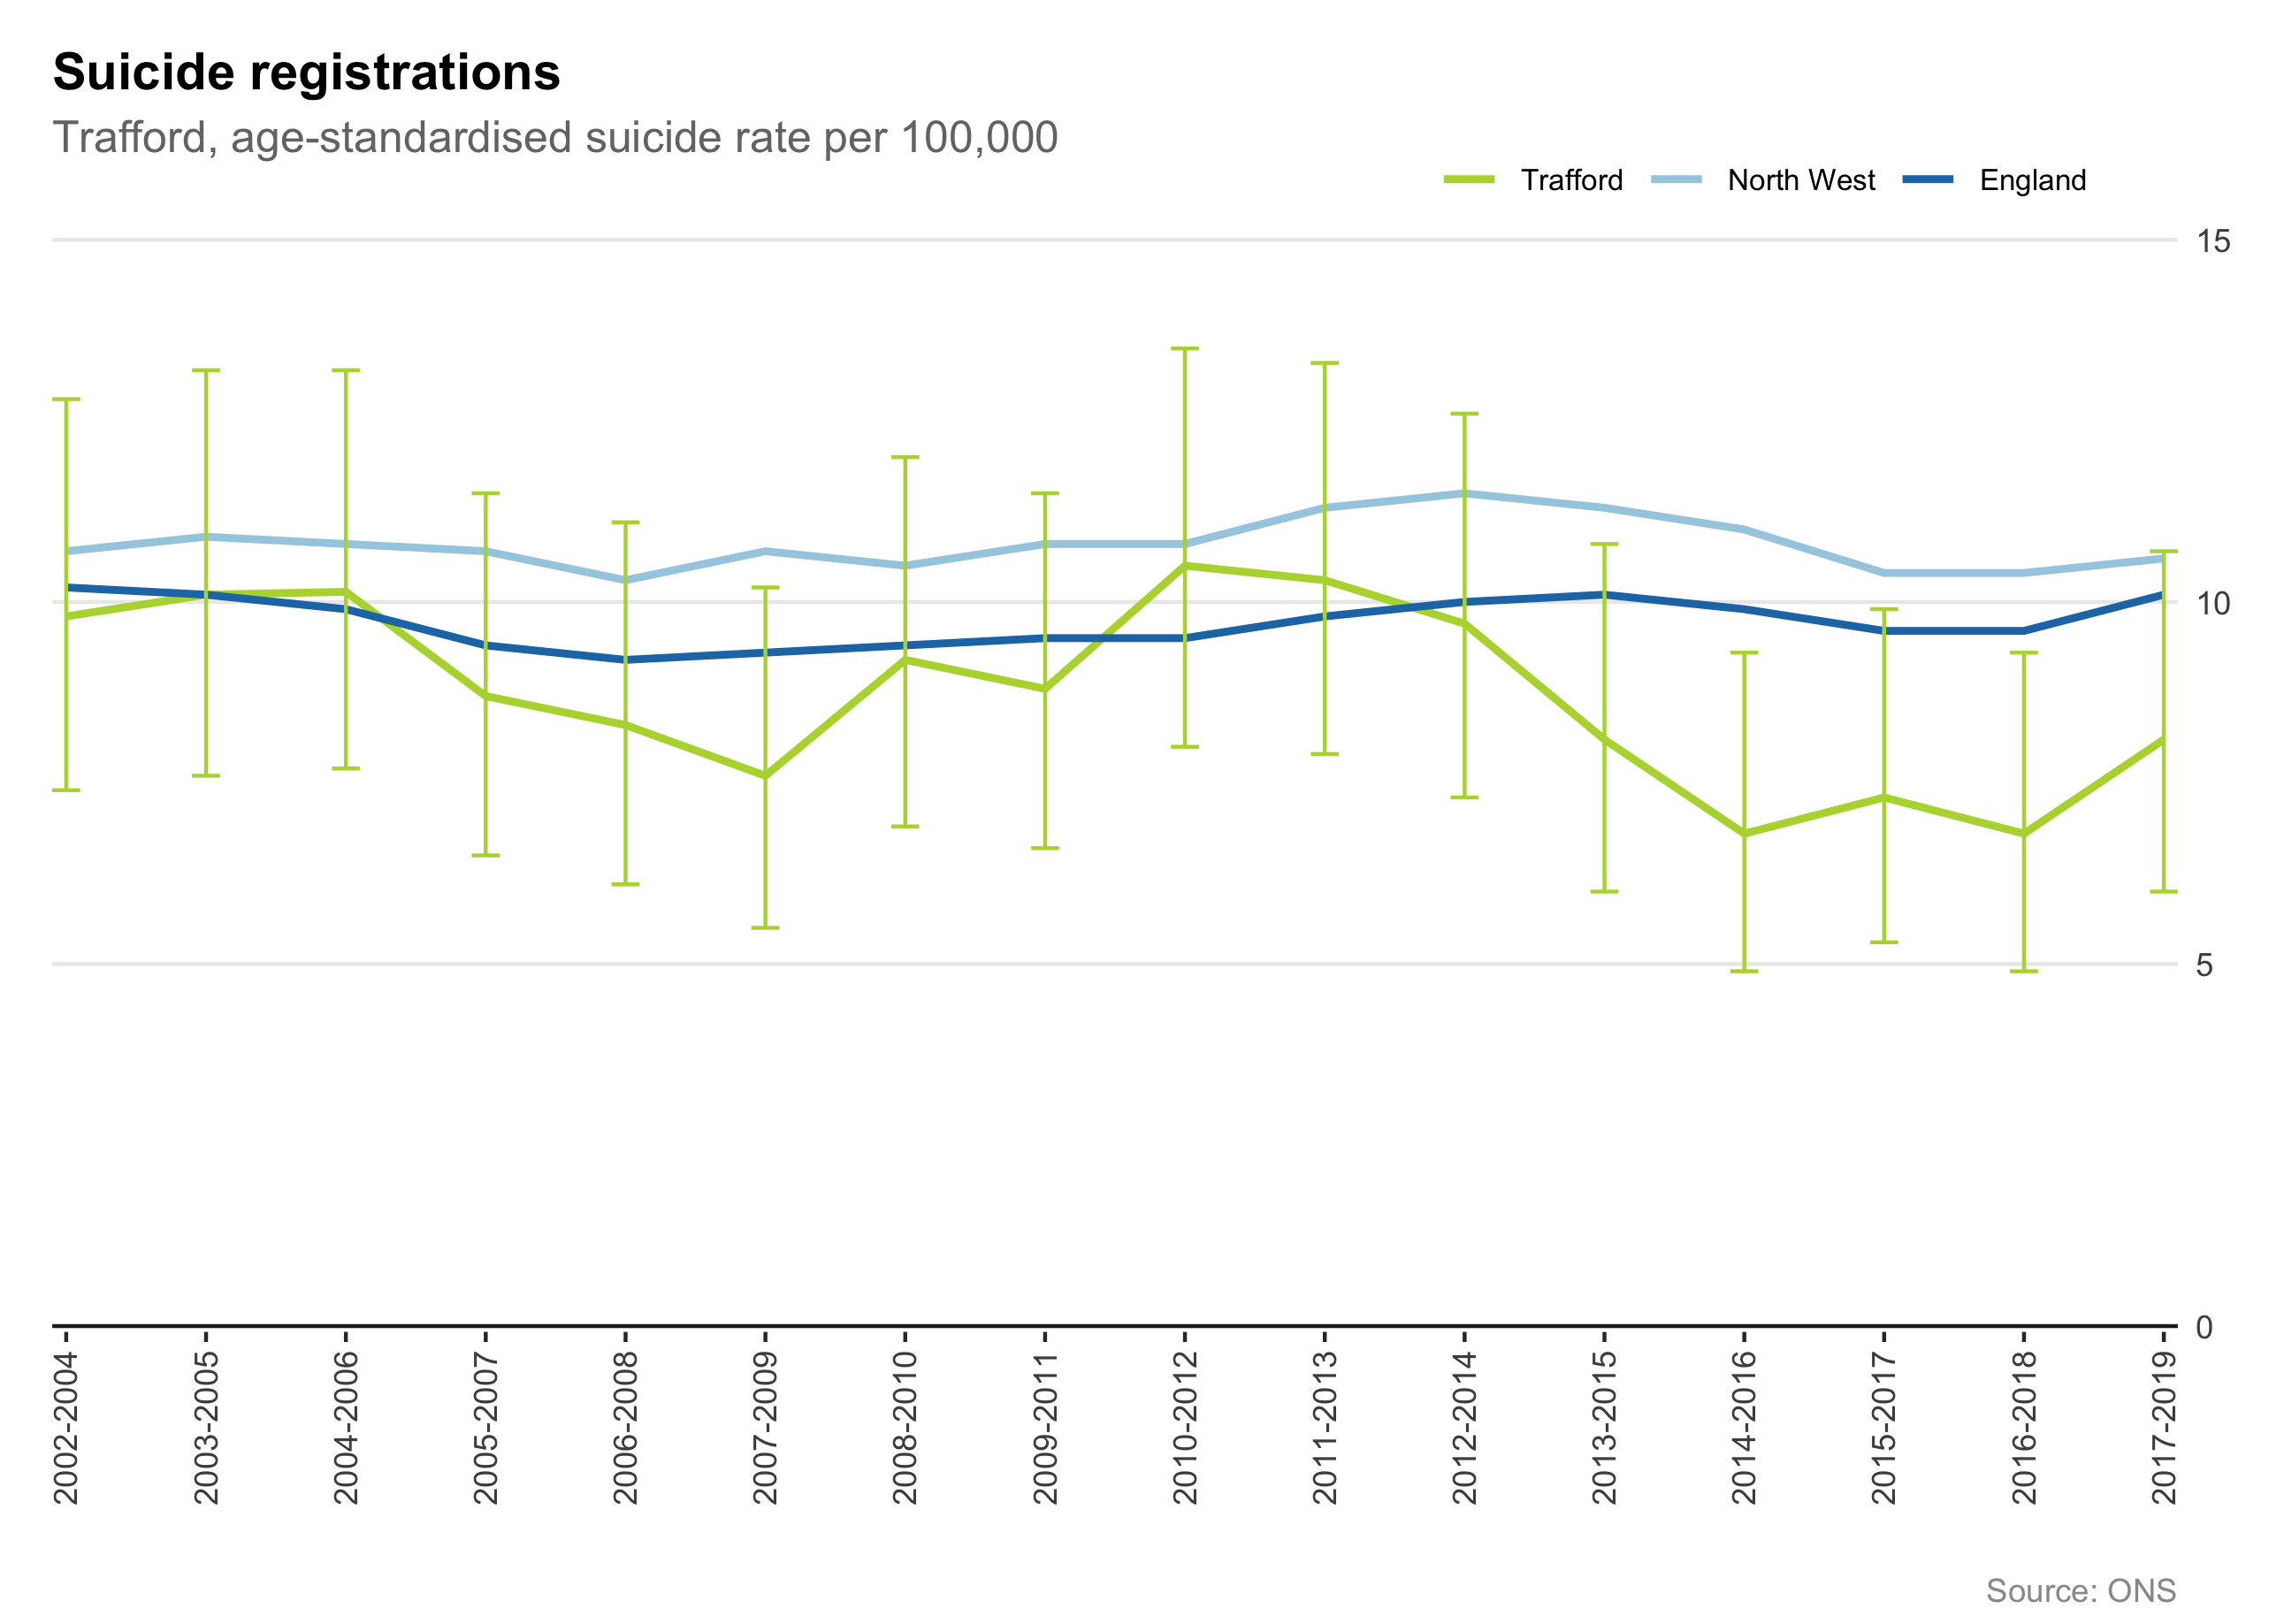 Trend in age-standardised suicide rate in Trafford, North West & England over 3-year rolling periods